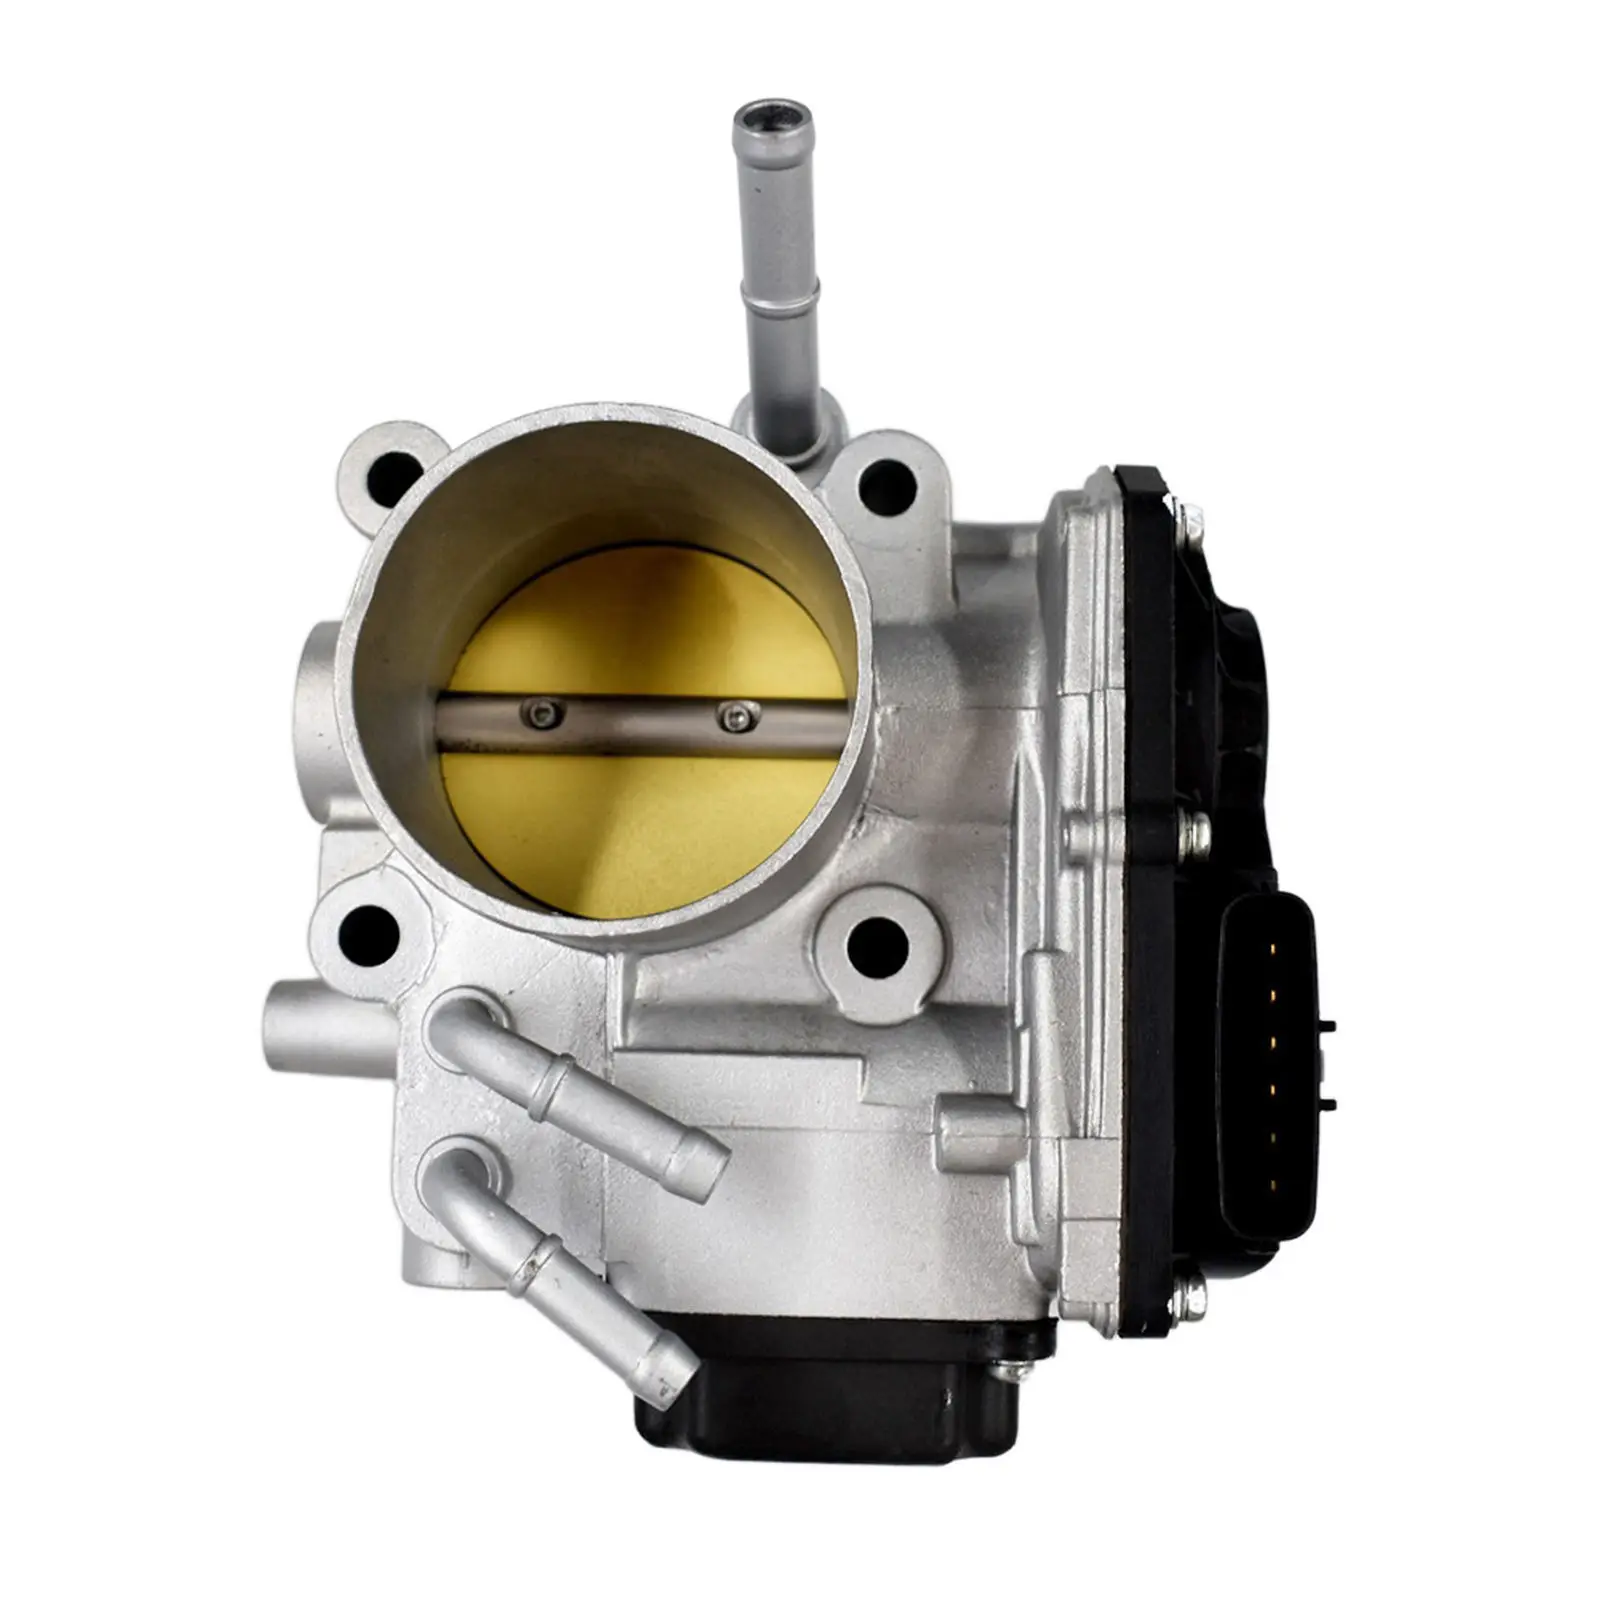 No. 16400-RAA-A6106-07Throttle Body Assembly for Honda Accord 2.4L 2006-2007 Vehicle Parts